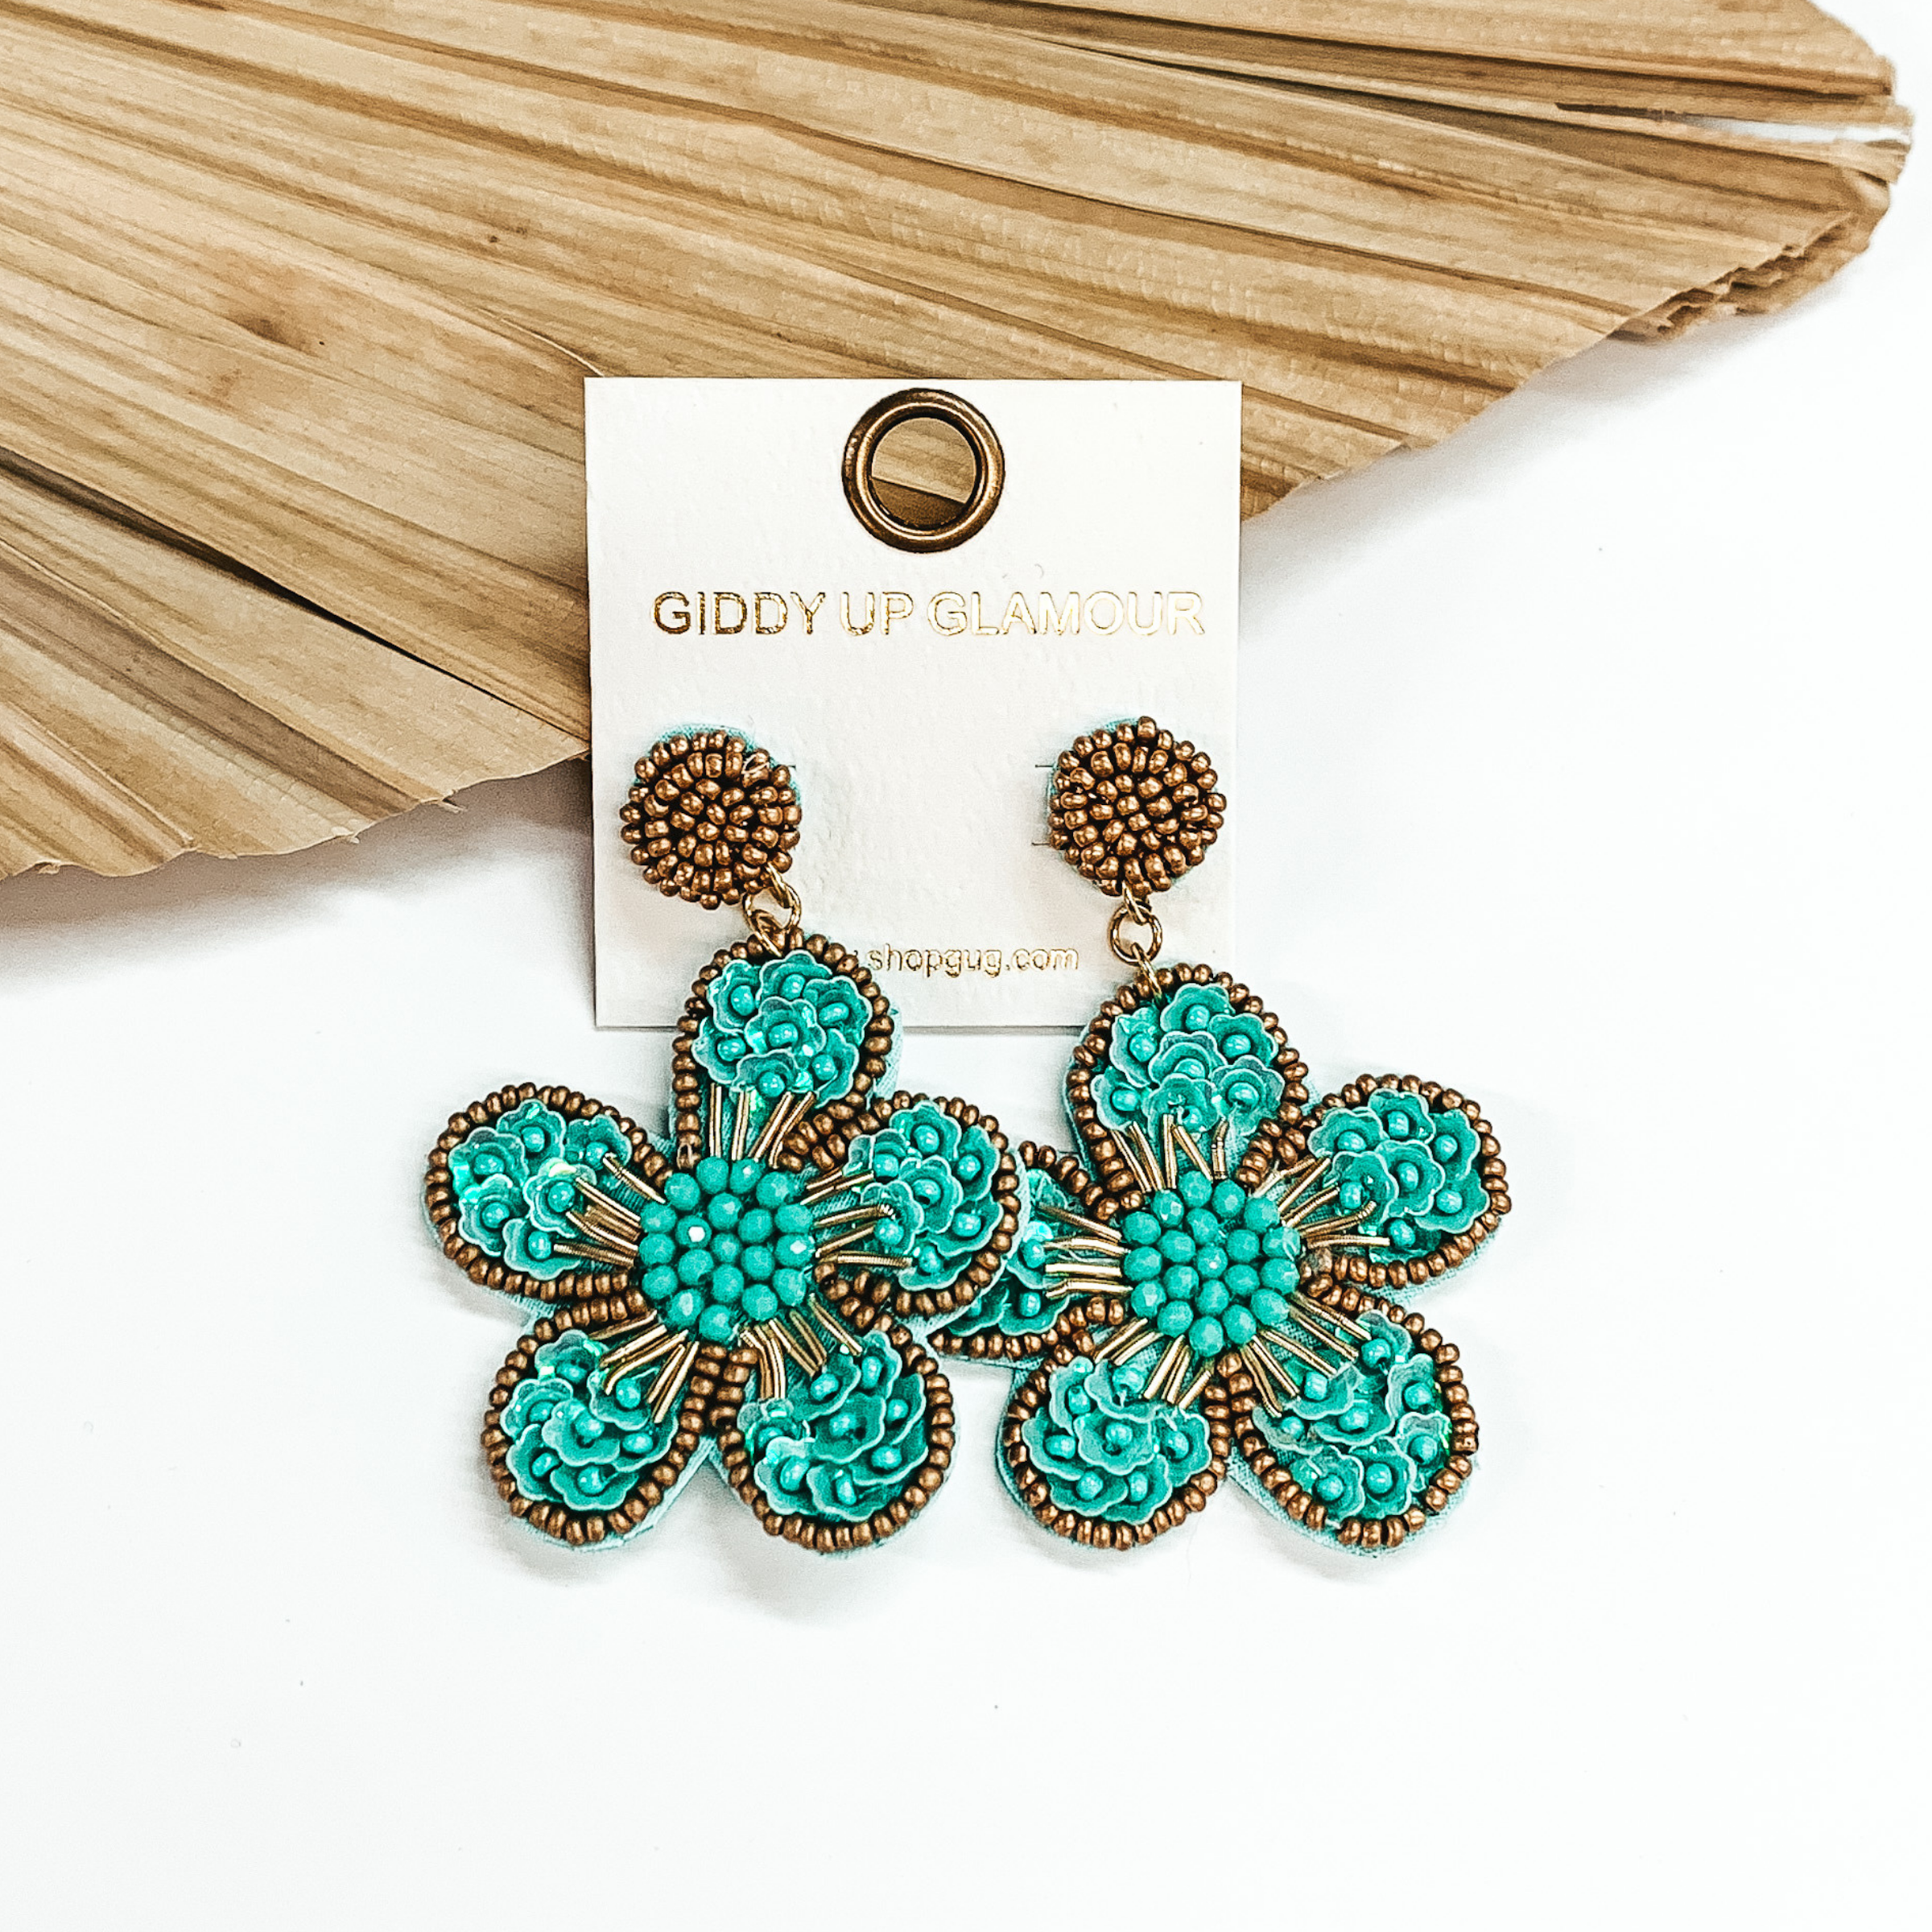 Gold beaded circle post back earrings. There is a hanging beaded flower pendant from the gold stud earrings. The flower pendant is turquoise with a gold outline and detailing. These earrings are pictured on a white background with a dried palm leaf in the background. 